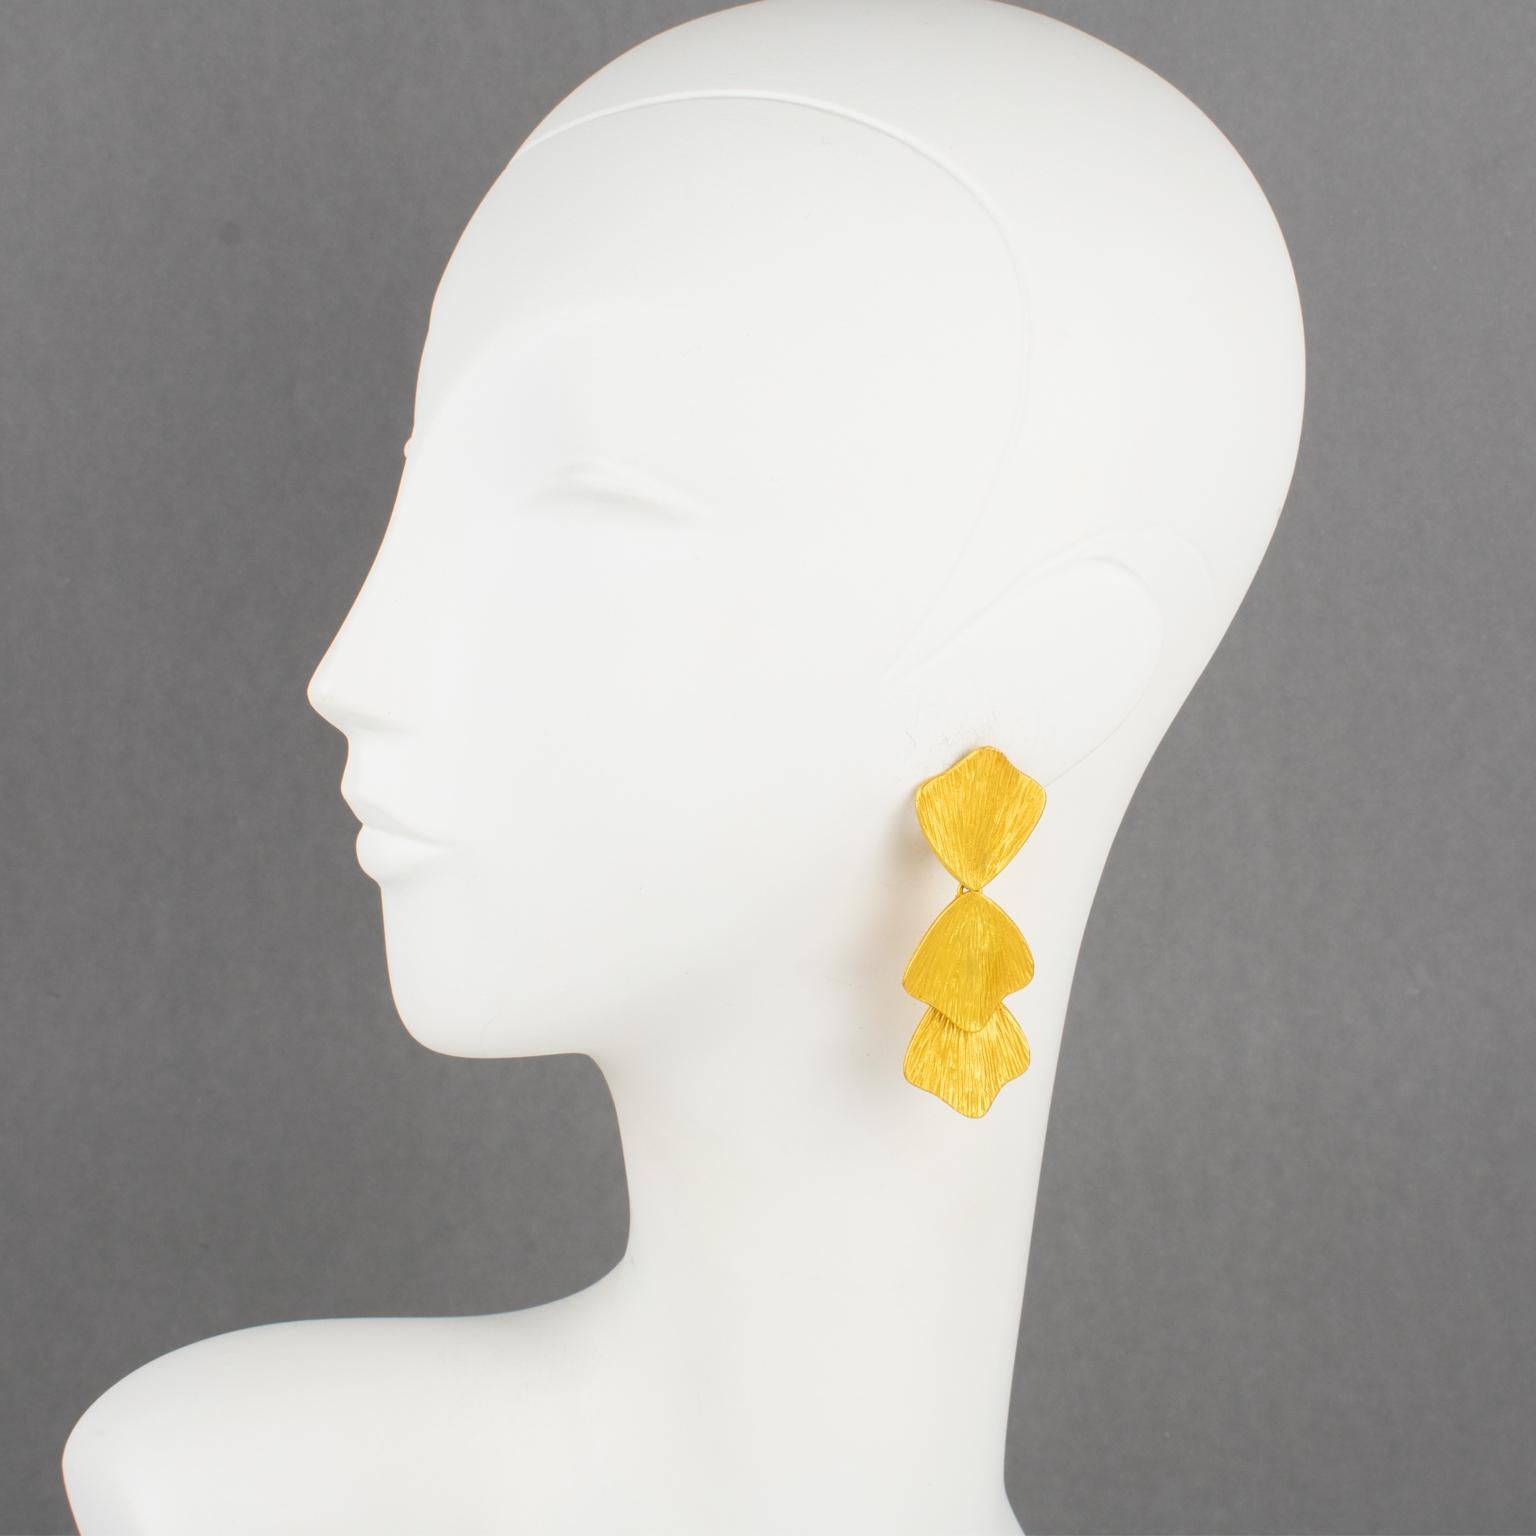 Claude Montana designed these romantic clip-on earrings for Marie Paris in the 1980s. They feature a floral dangling drop shape with gilded metal, all textured and carved in water lily leaves. Both pieces are marked on the underside with the